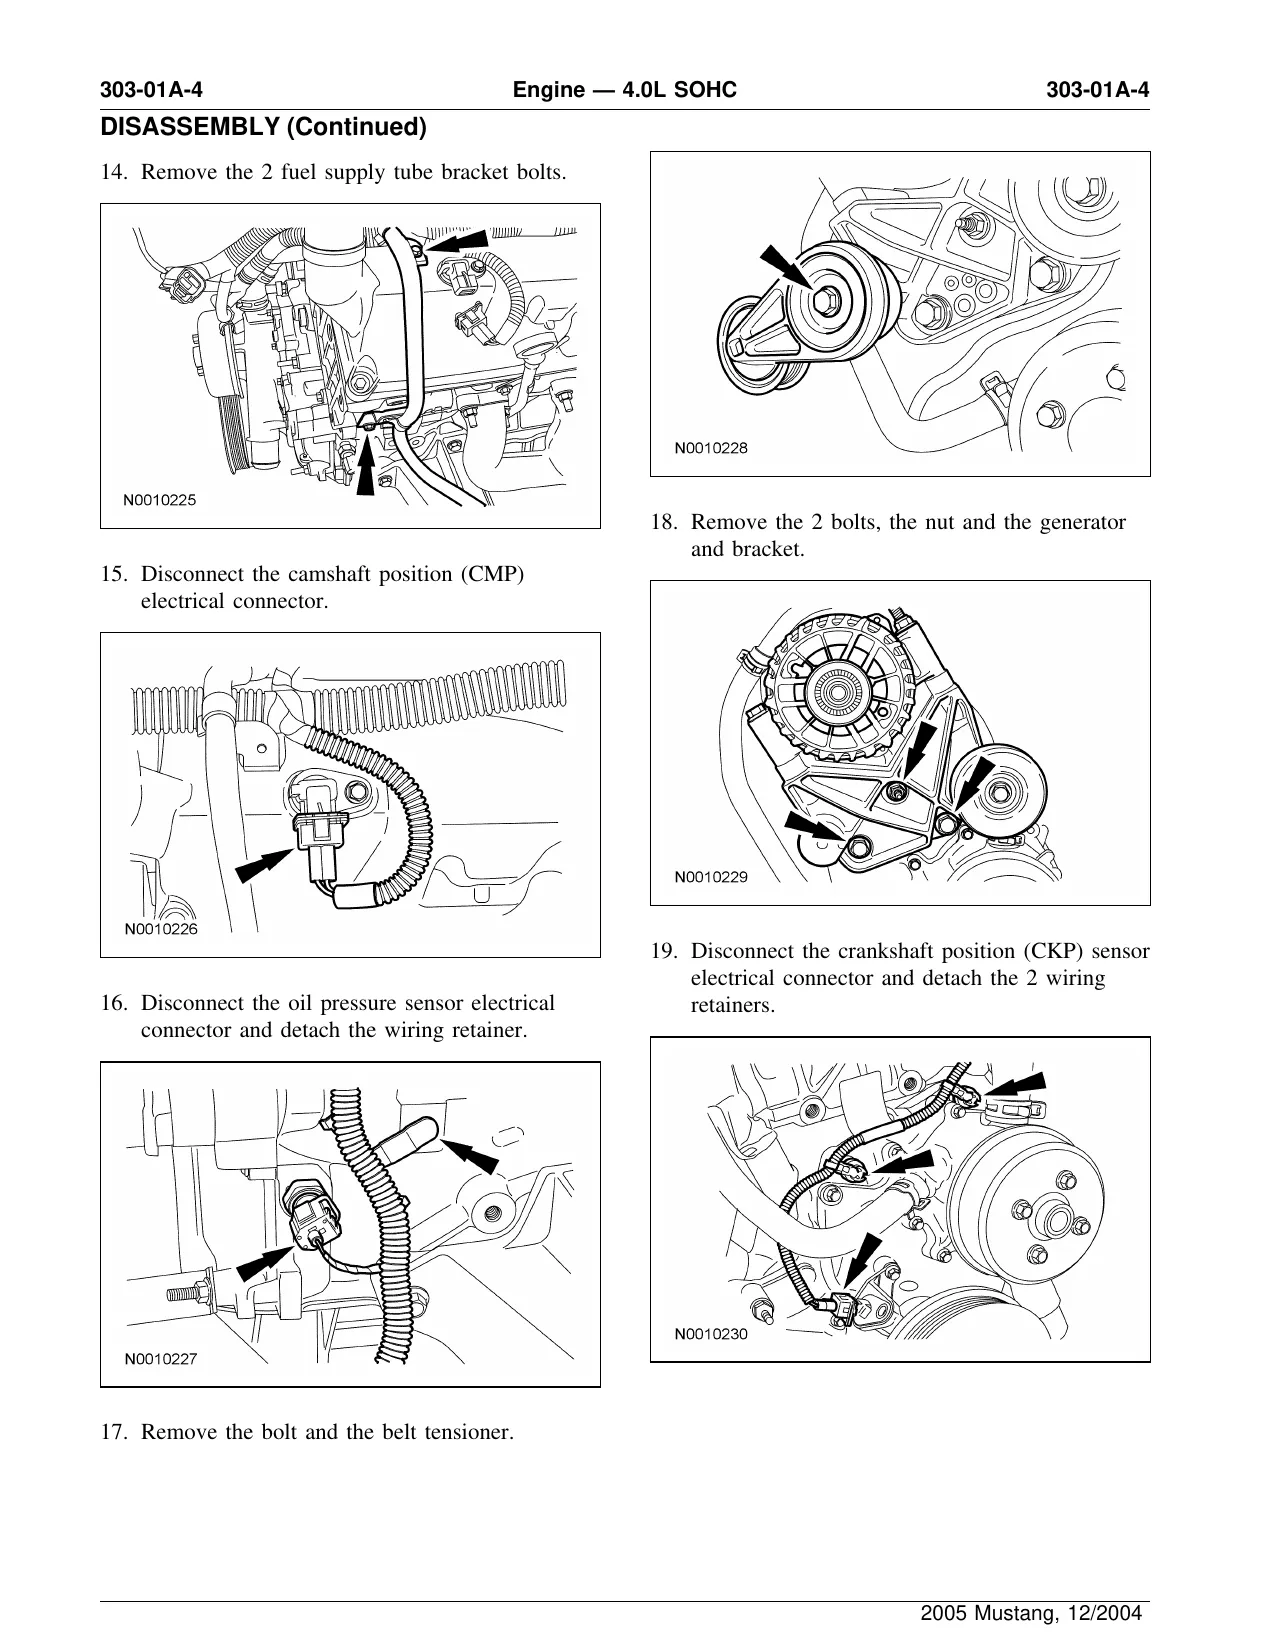 2005-2010 Ford Mustang service manual Preview image 4